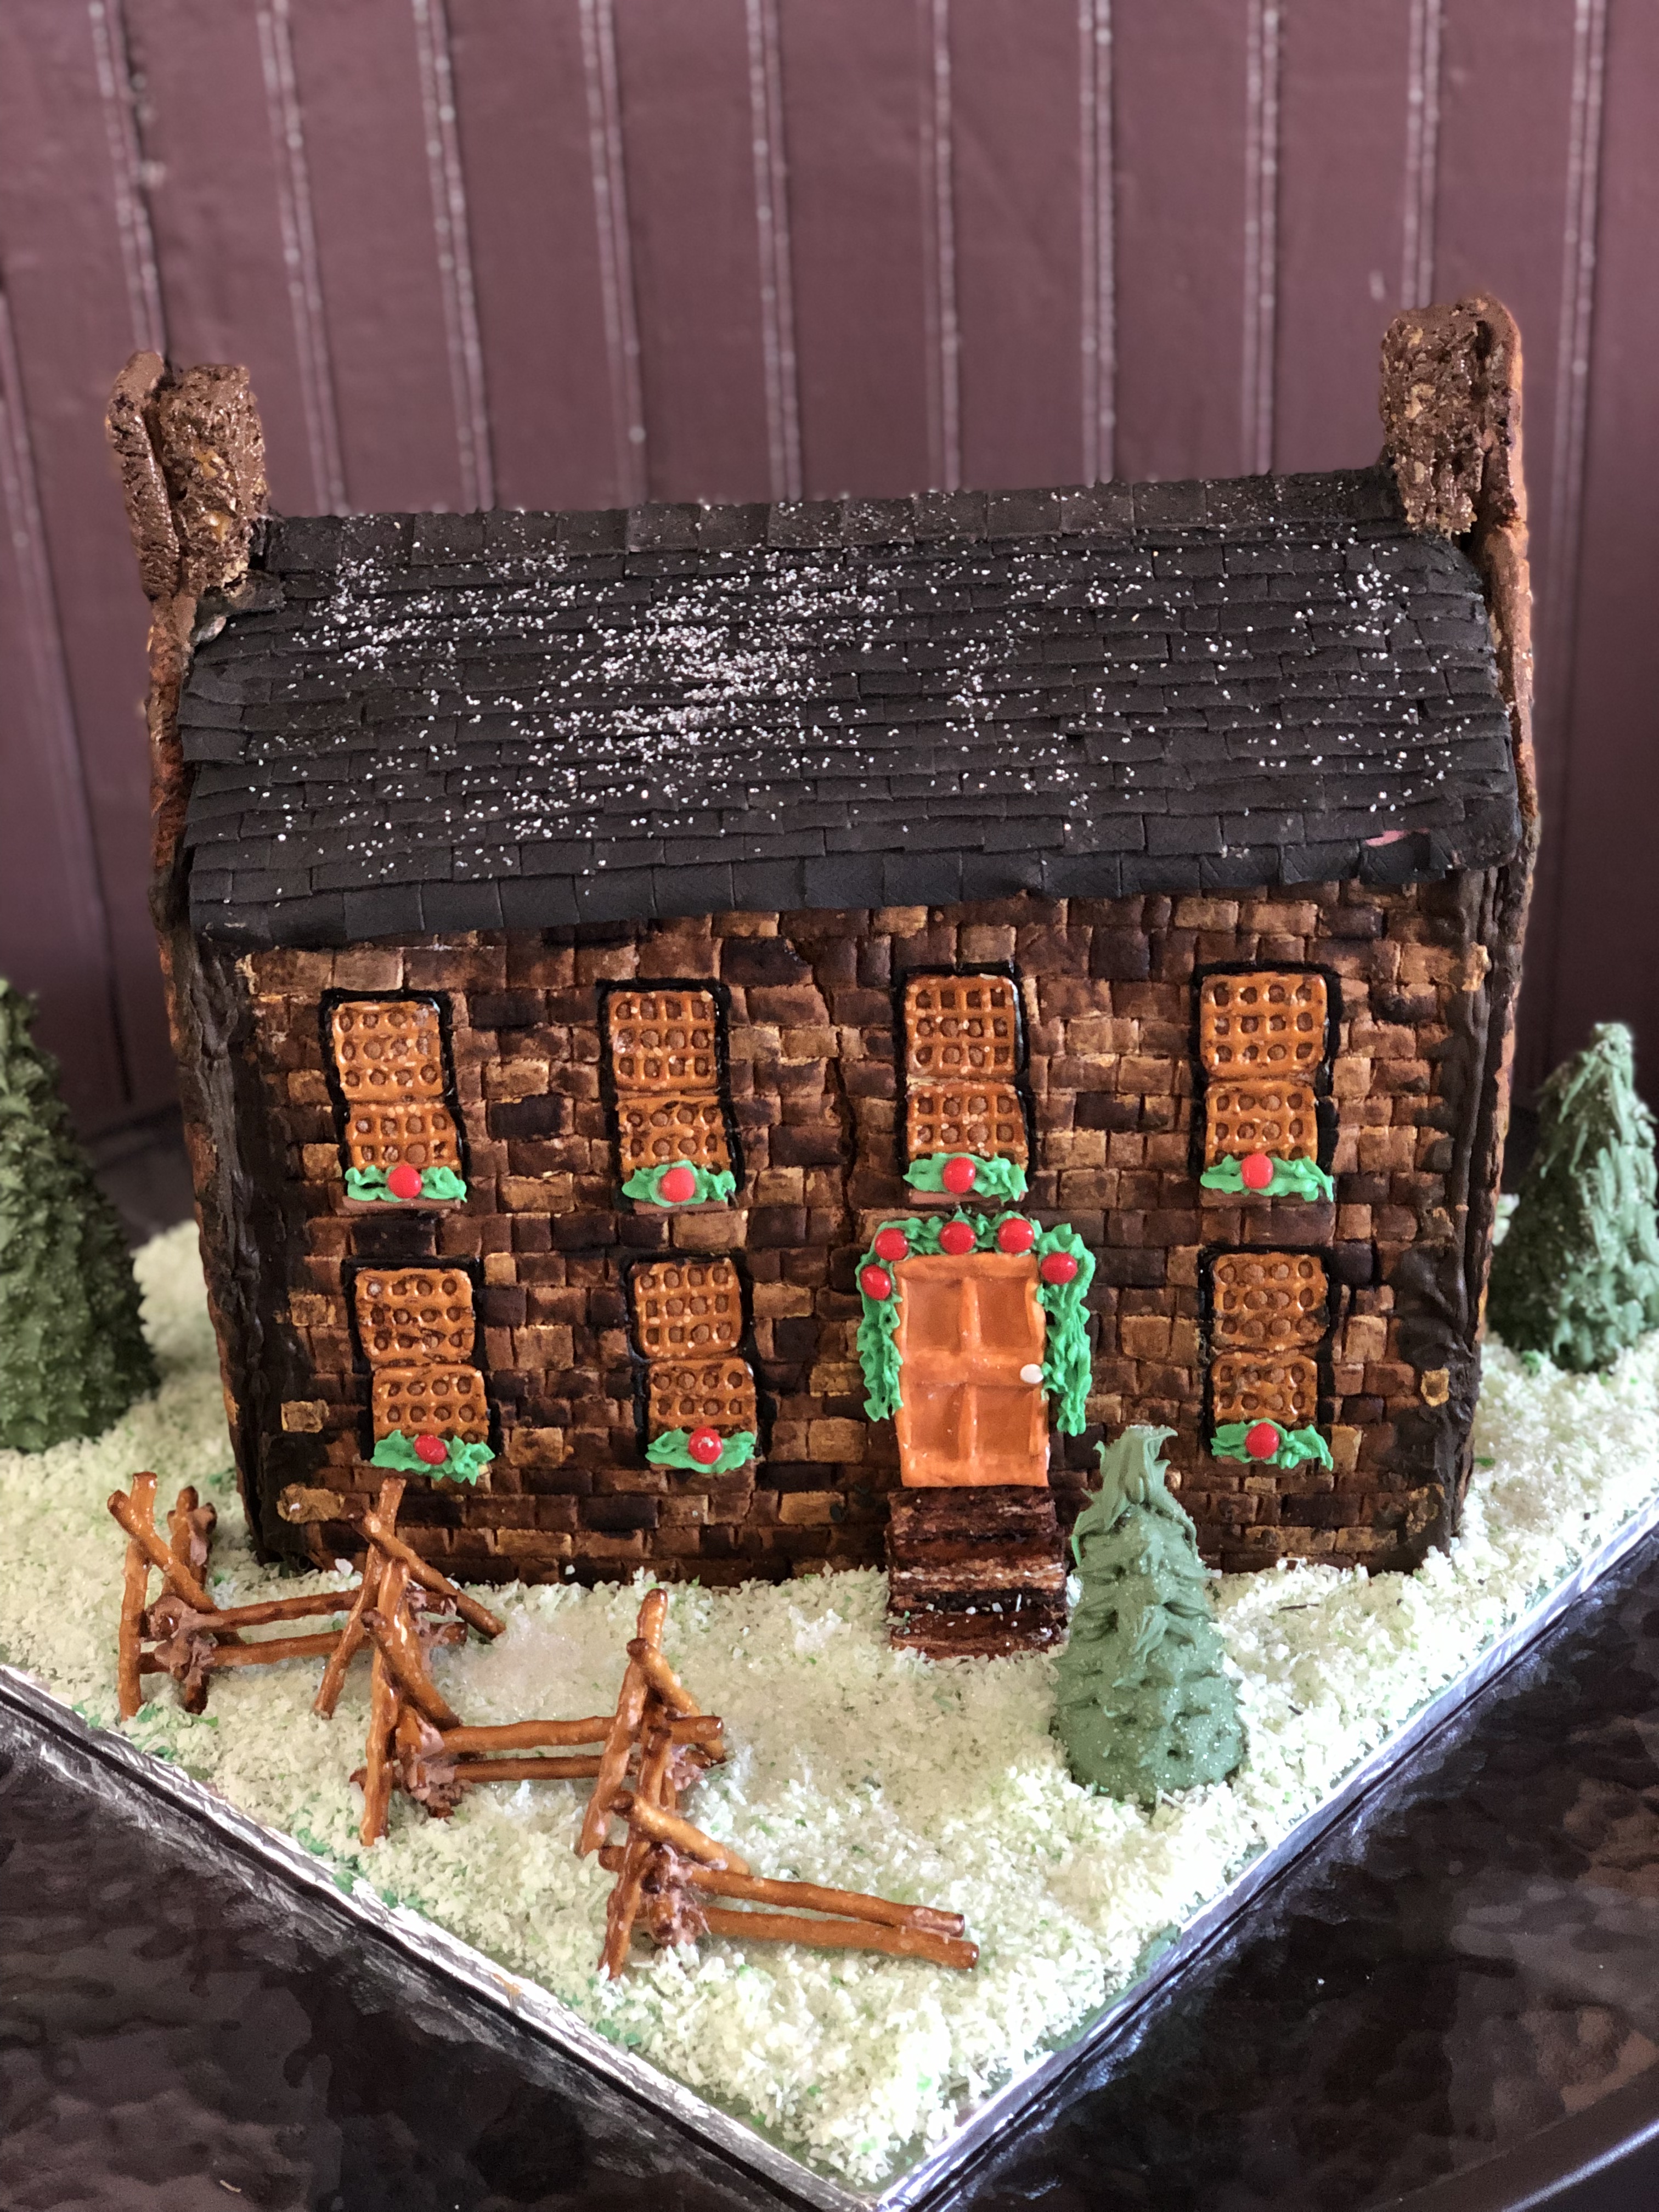 gingerbread houses turning stone casino 2019